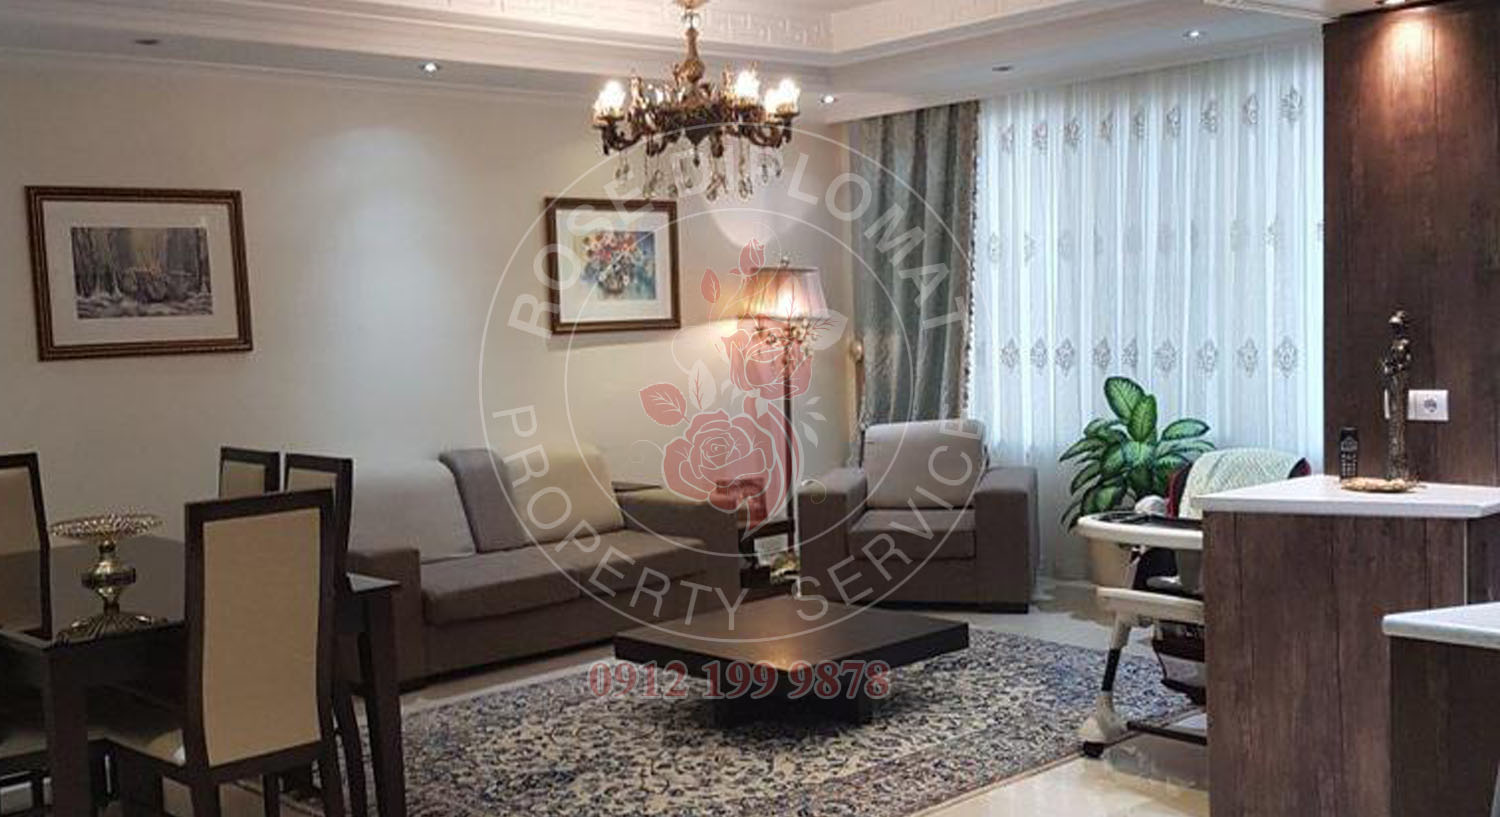 Rent Apartment in sohrevsrdy